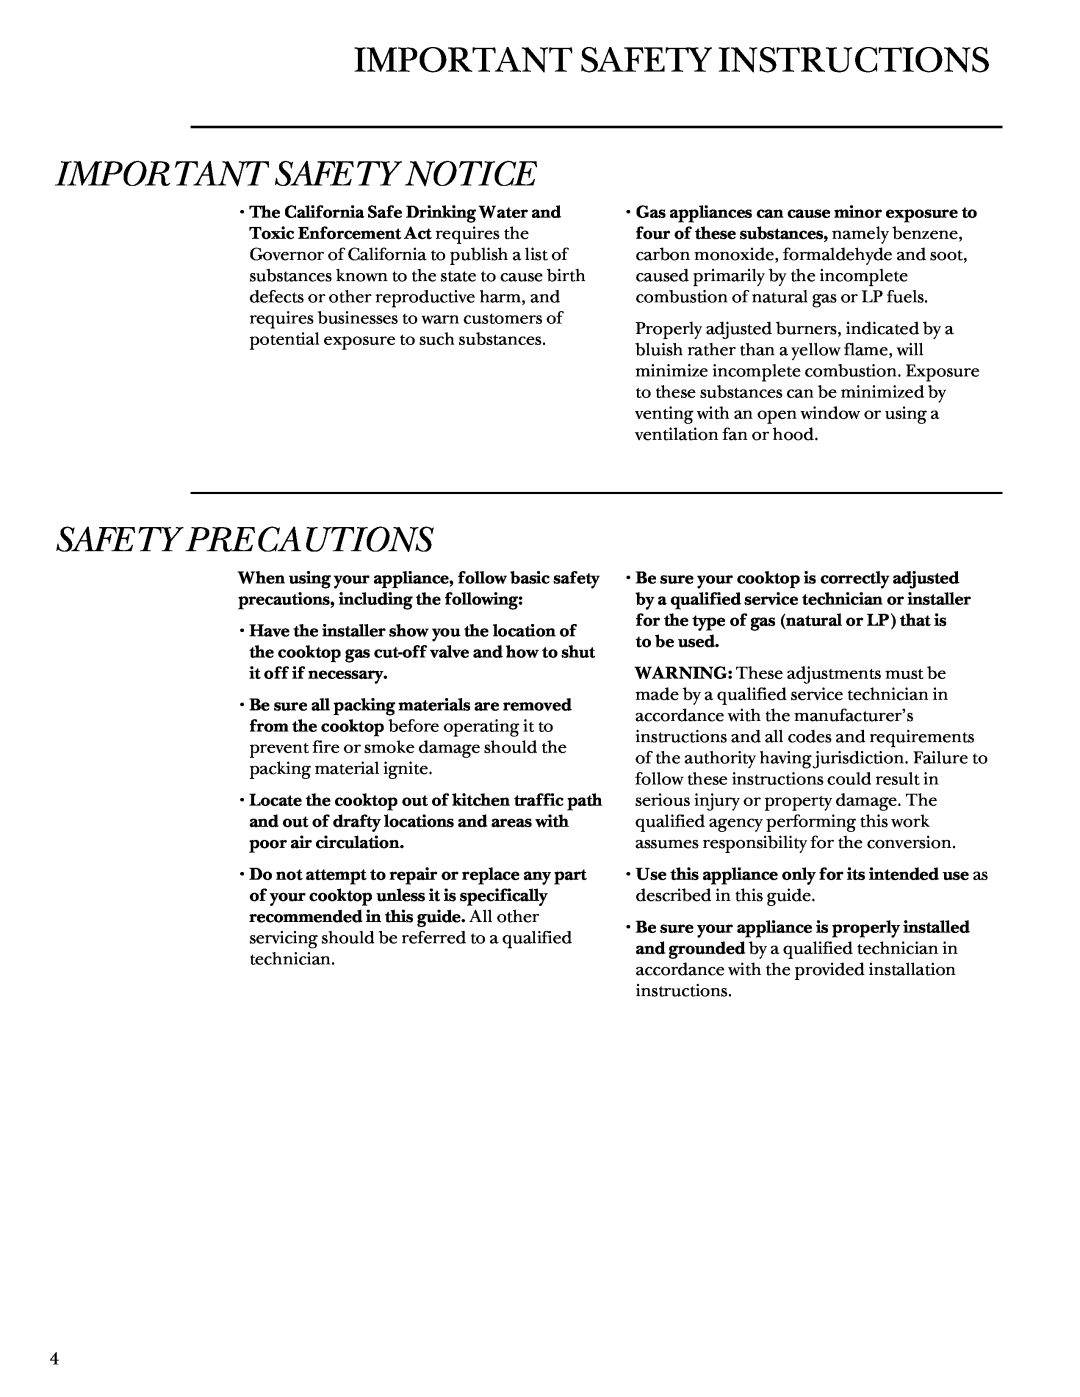 GE Monogram 164D3333P027 manual Important Safety Instructions, Important Safety Notice, Safety Precautions 